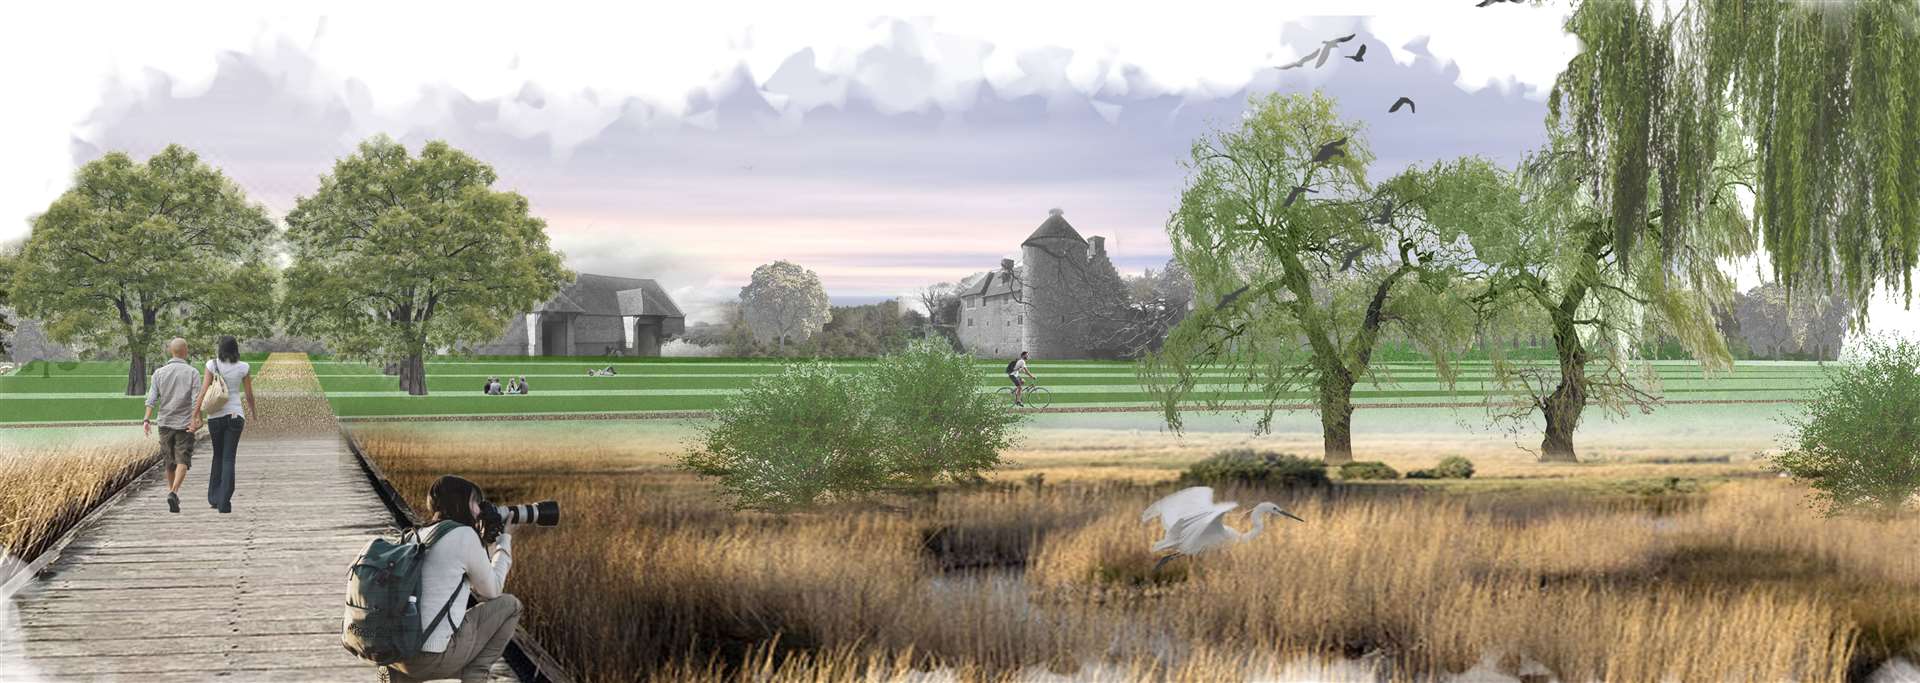 How Otterpool Park's 'Castle Park' could look. Photo: Otterpool Park/Pillory Barn